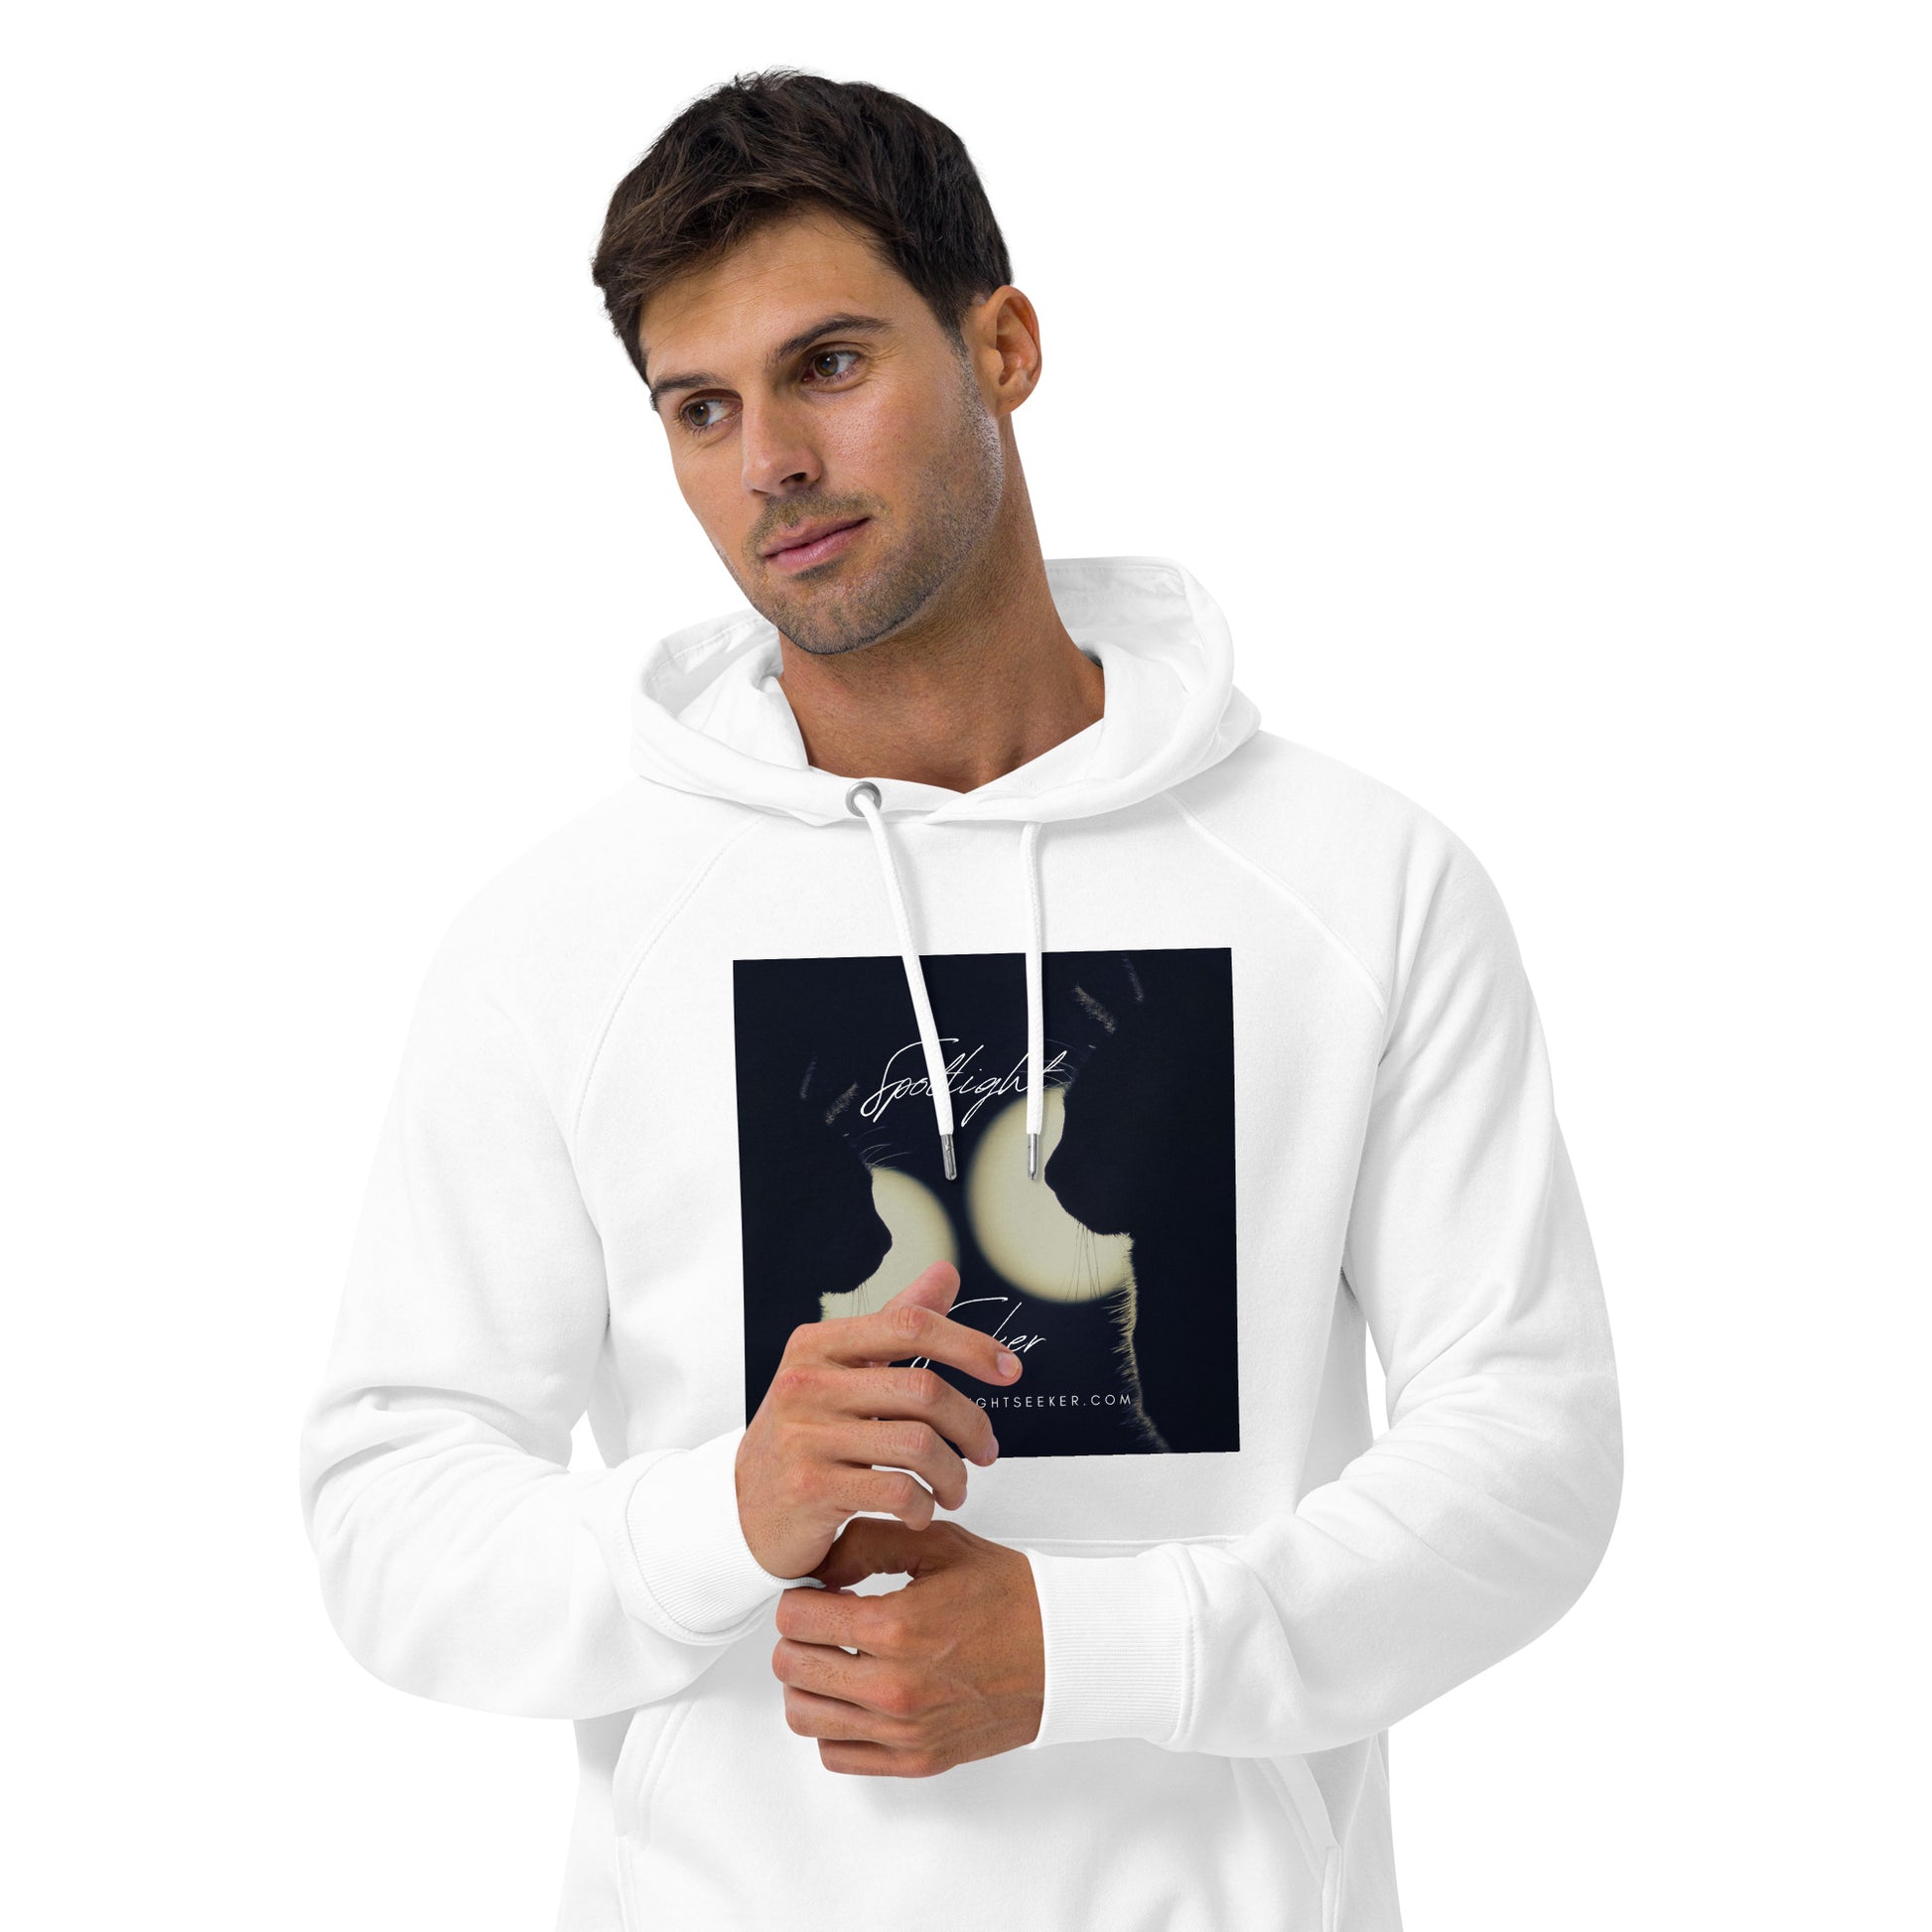 Image of the Cat Call Unisex Fitted Eco Hoodie - 'Dos Gotos Dos Gatos' design, a comfortable and stylish hoodie symbolizing artistic spotlight birthright, featuring an artistic portrayal of two cats. Crafted from eco-friendly materials. 🐱🎨